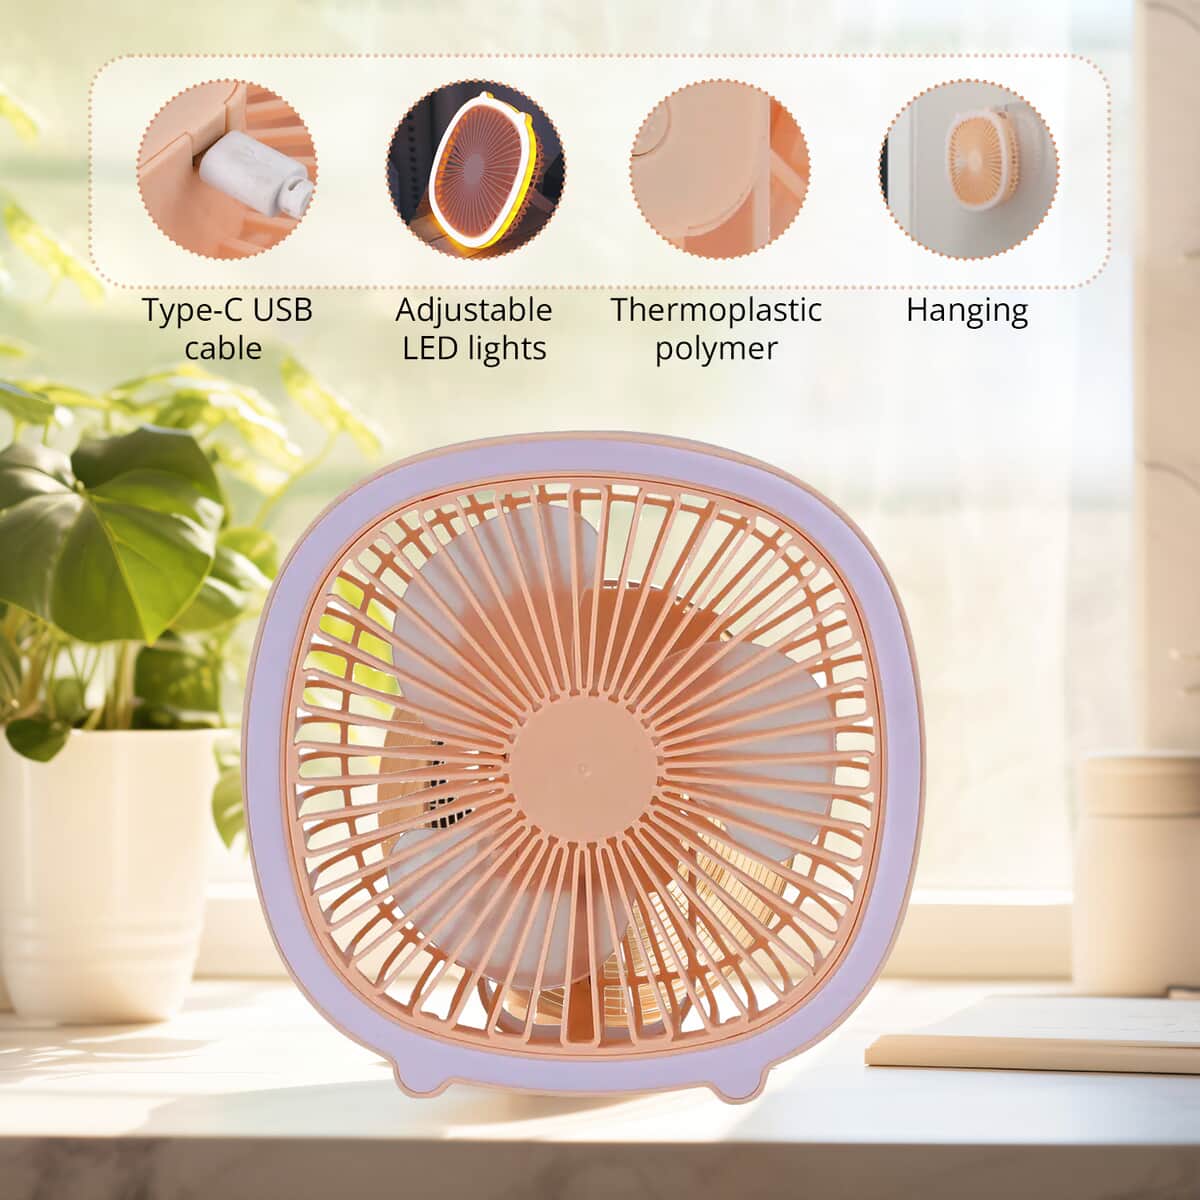 Ankur's Treasure Chest Peach 2-in-1 Table LED Lamp and Desktop Fan With Type-c USB and 3 Speed Mode (5V/1.5A, 18650 Battery) image number 4